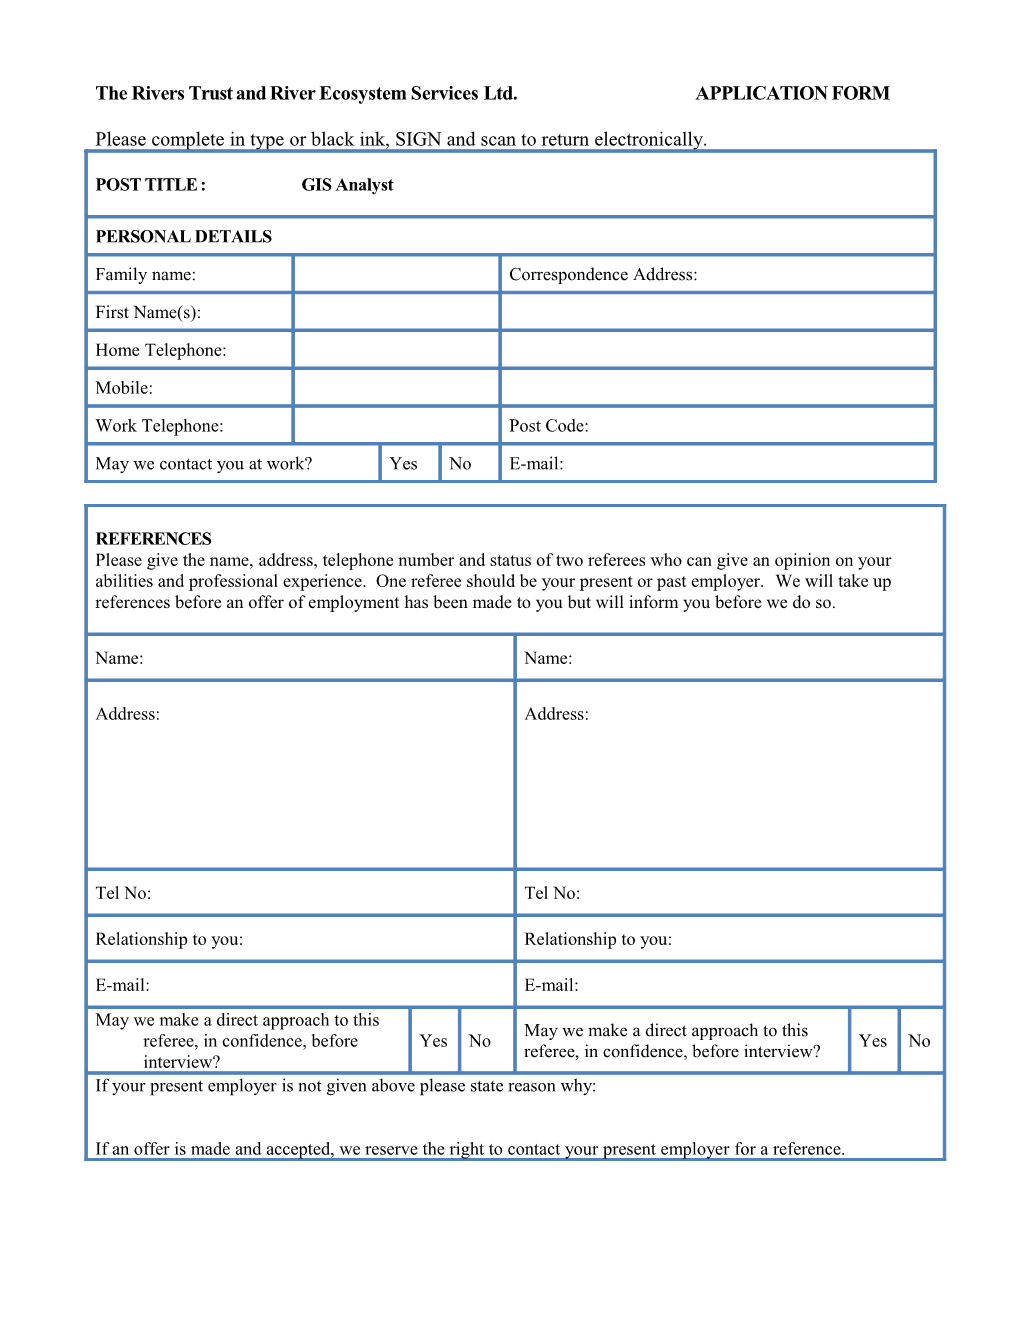 The Rivers Trust and River Ecosystem Services Ltd. APPLICATION FORM